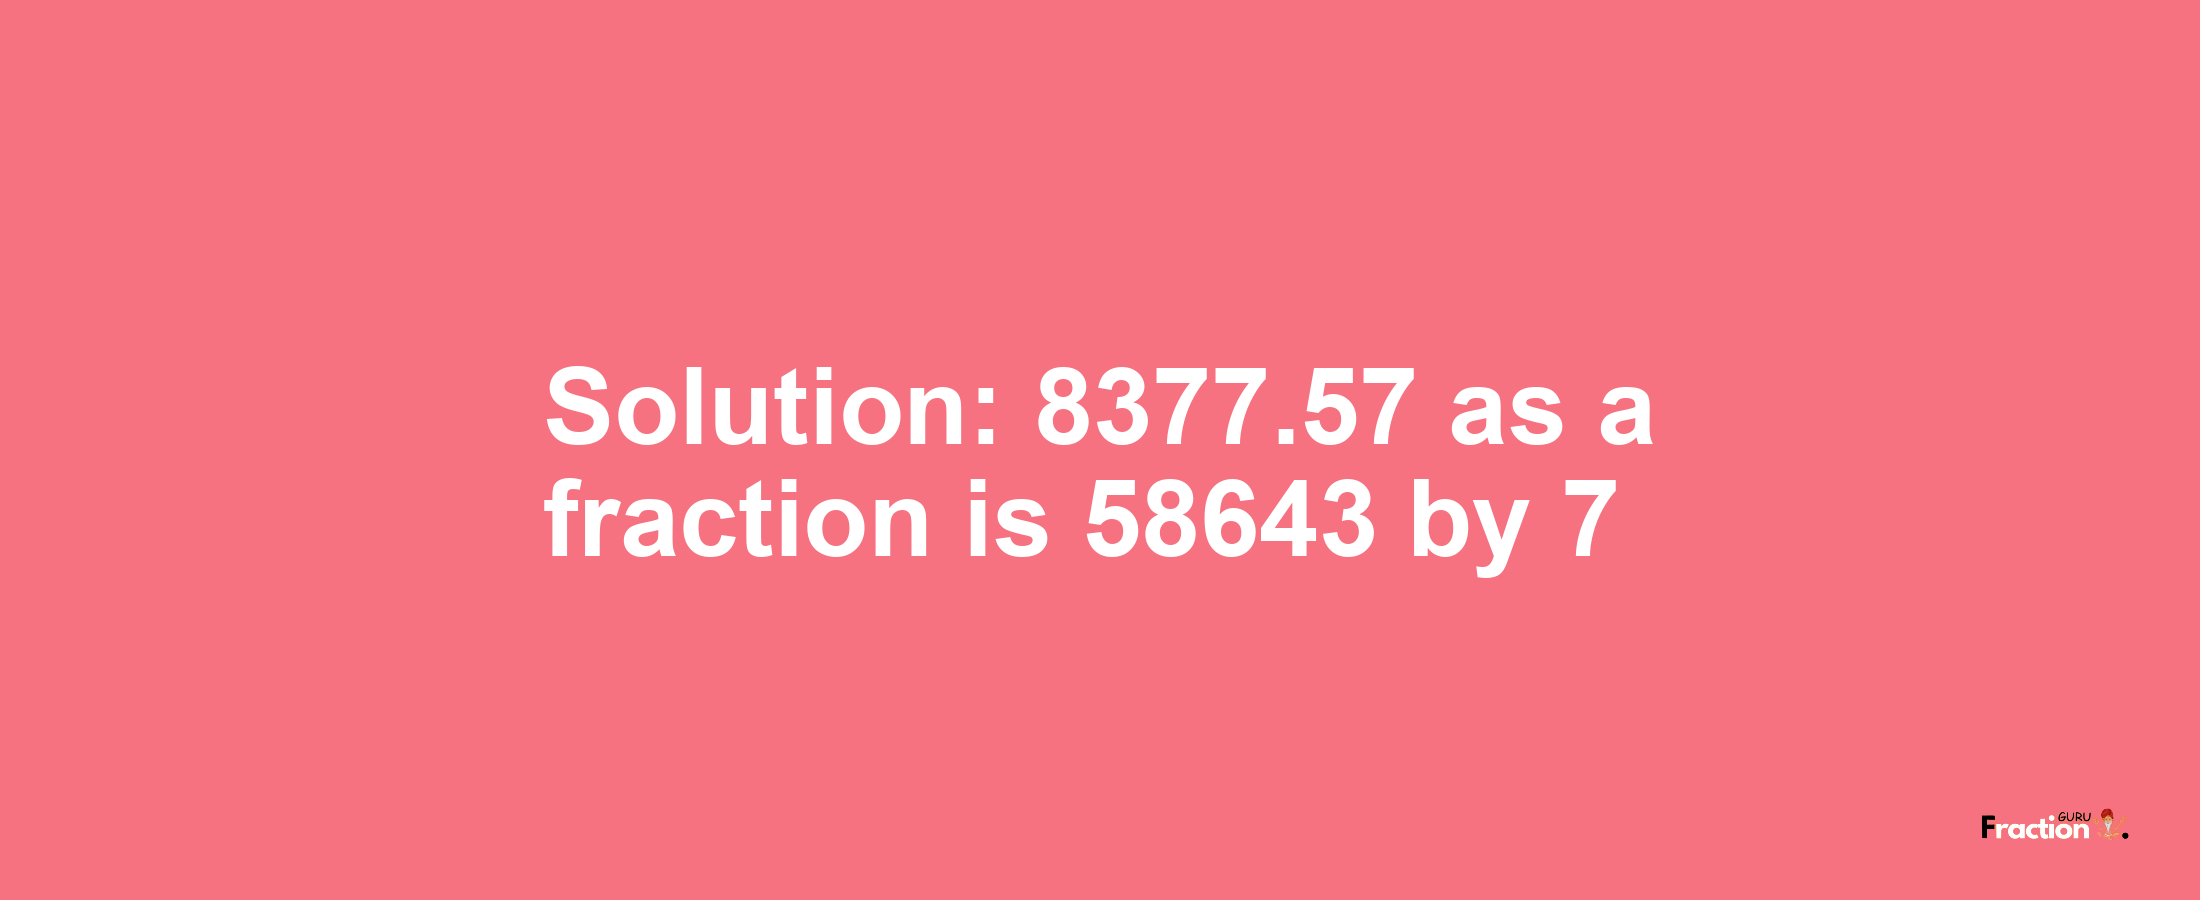 Solution:8377.57 as a fraction is 58643/7